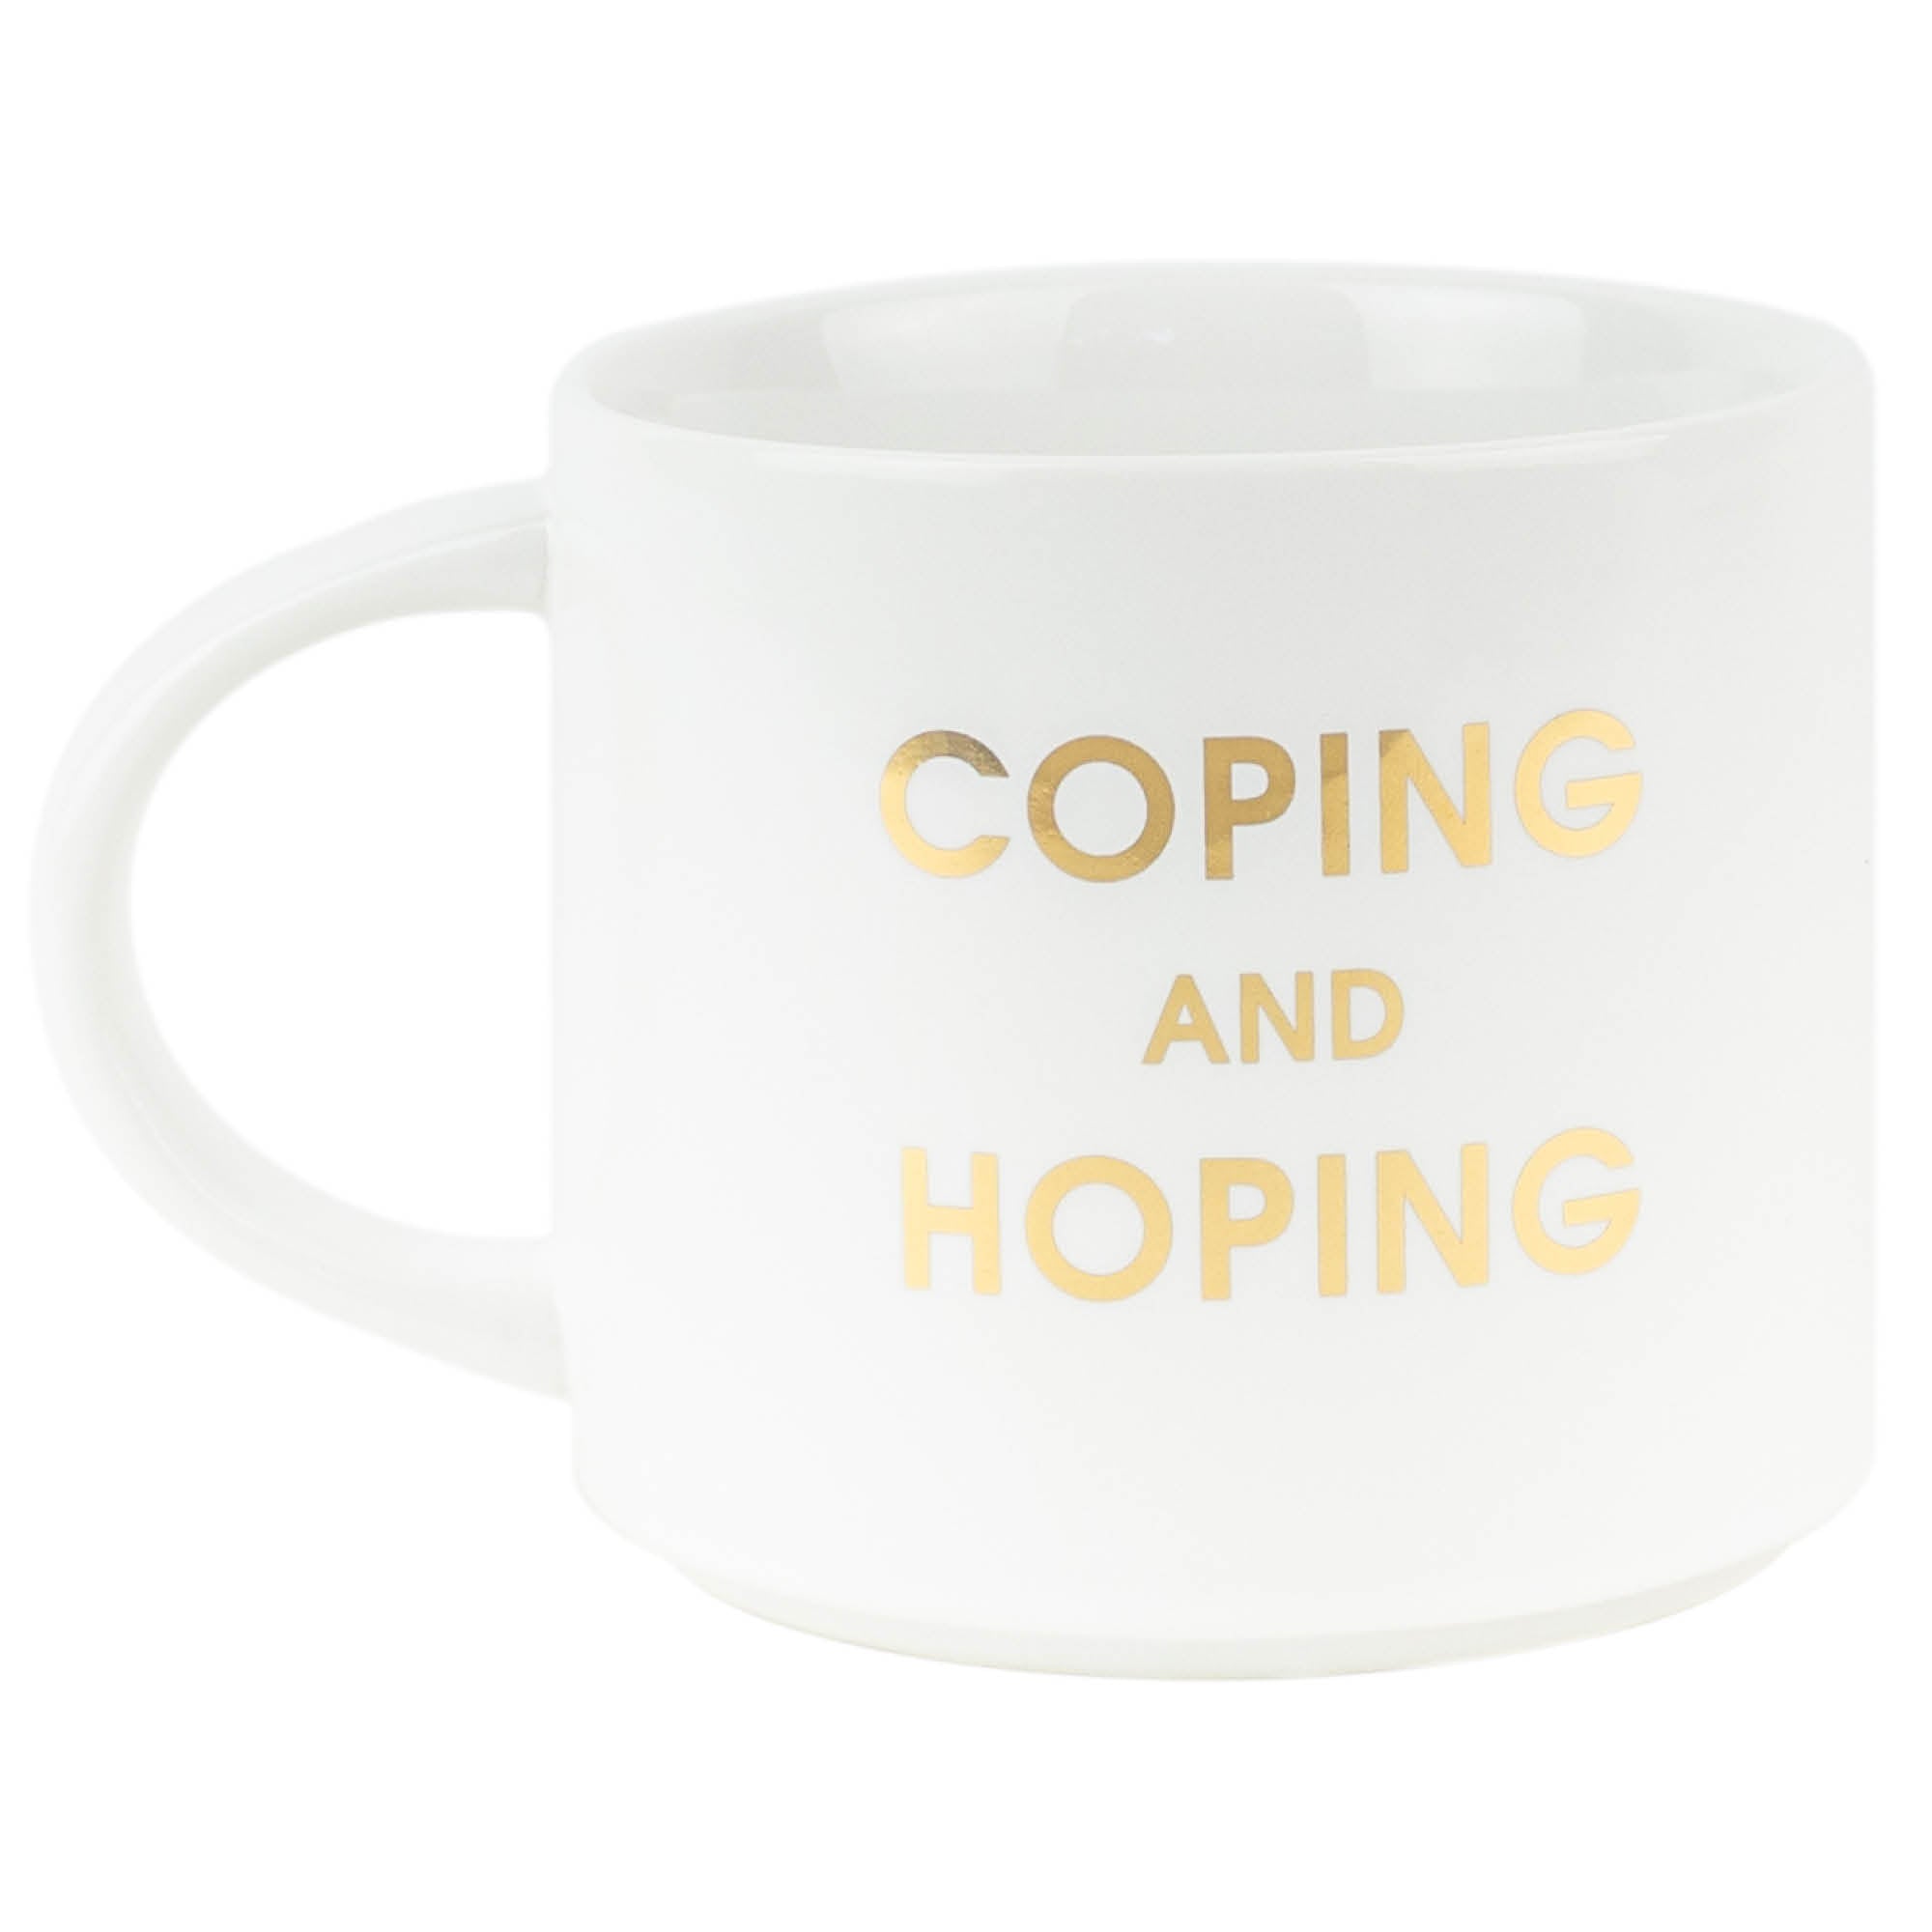 Coping and Hoping Gold Metallic Mug (Slight Imperfections)